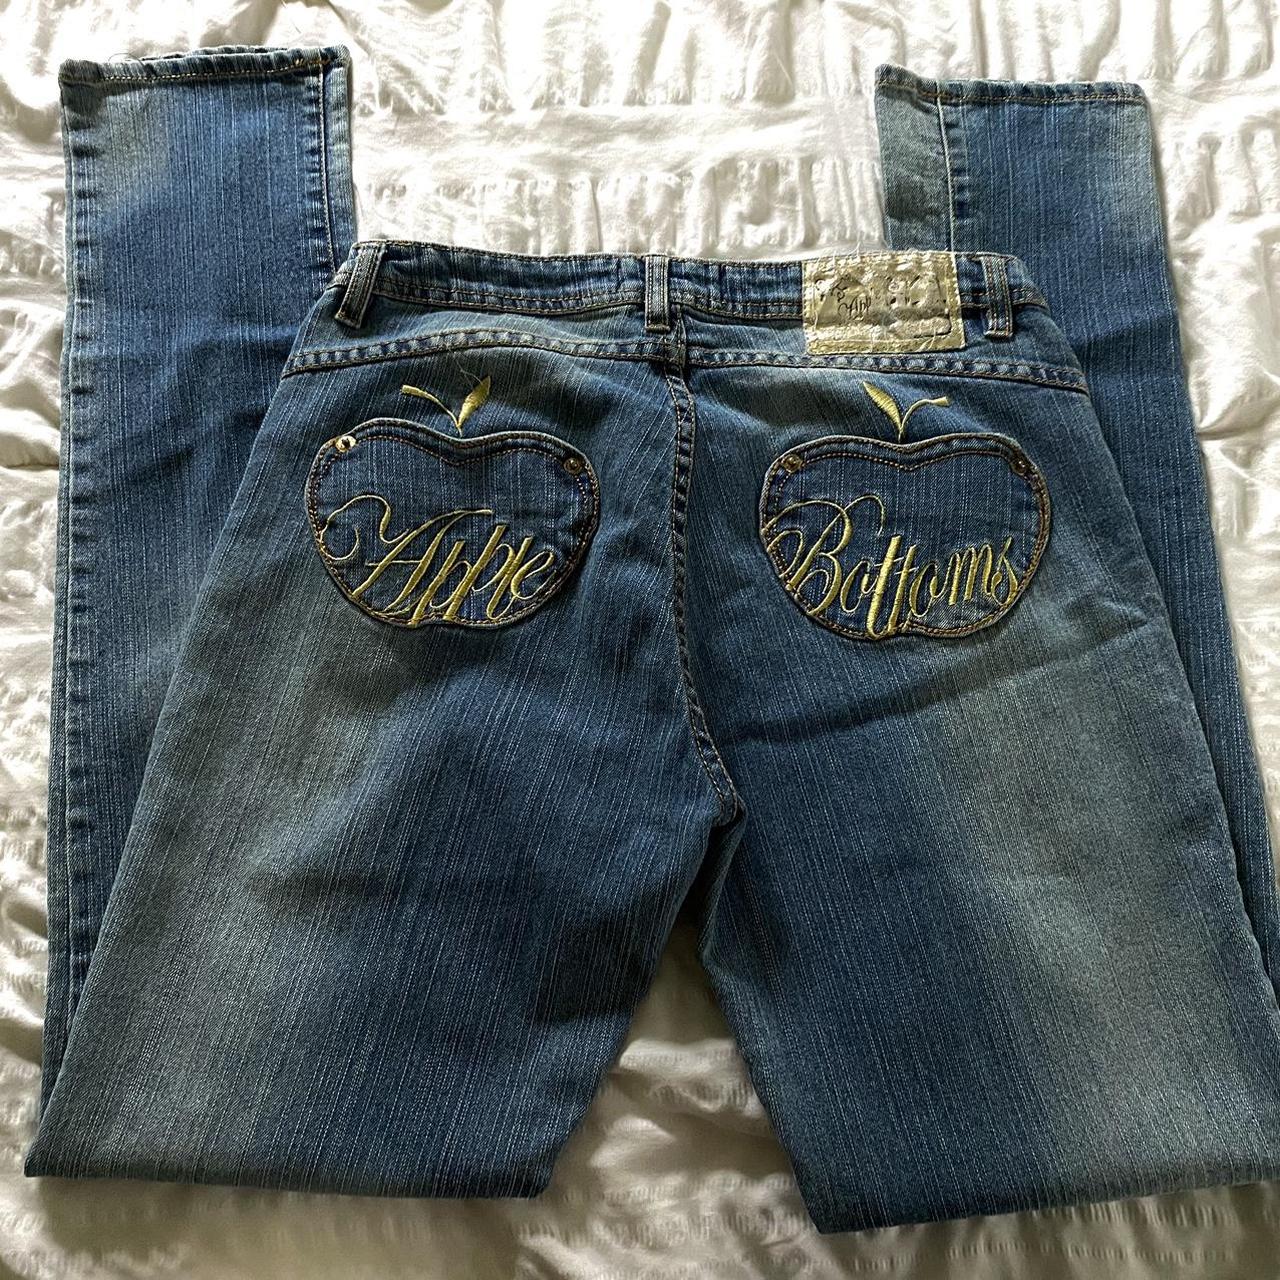 Apple Bottoms Women's Blue and Yellow Jeans